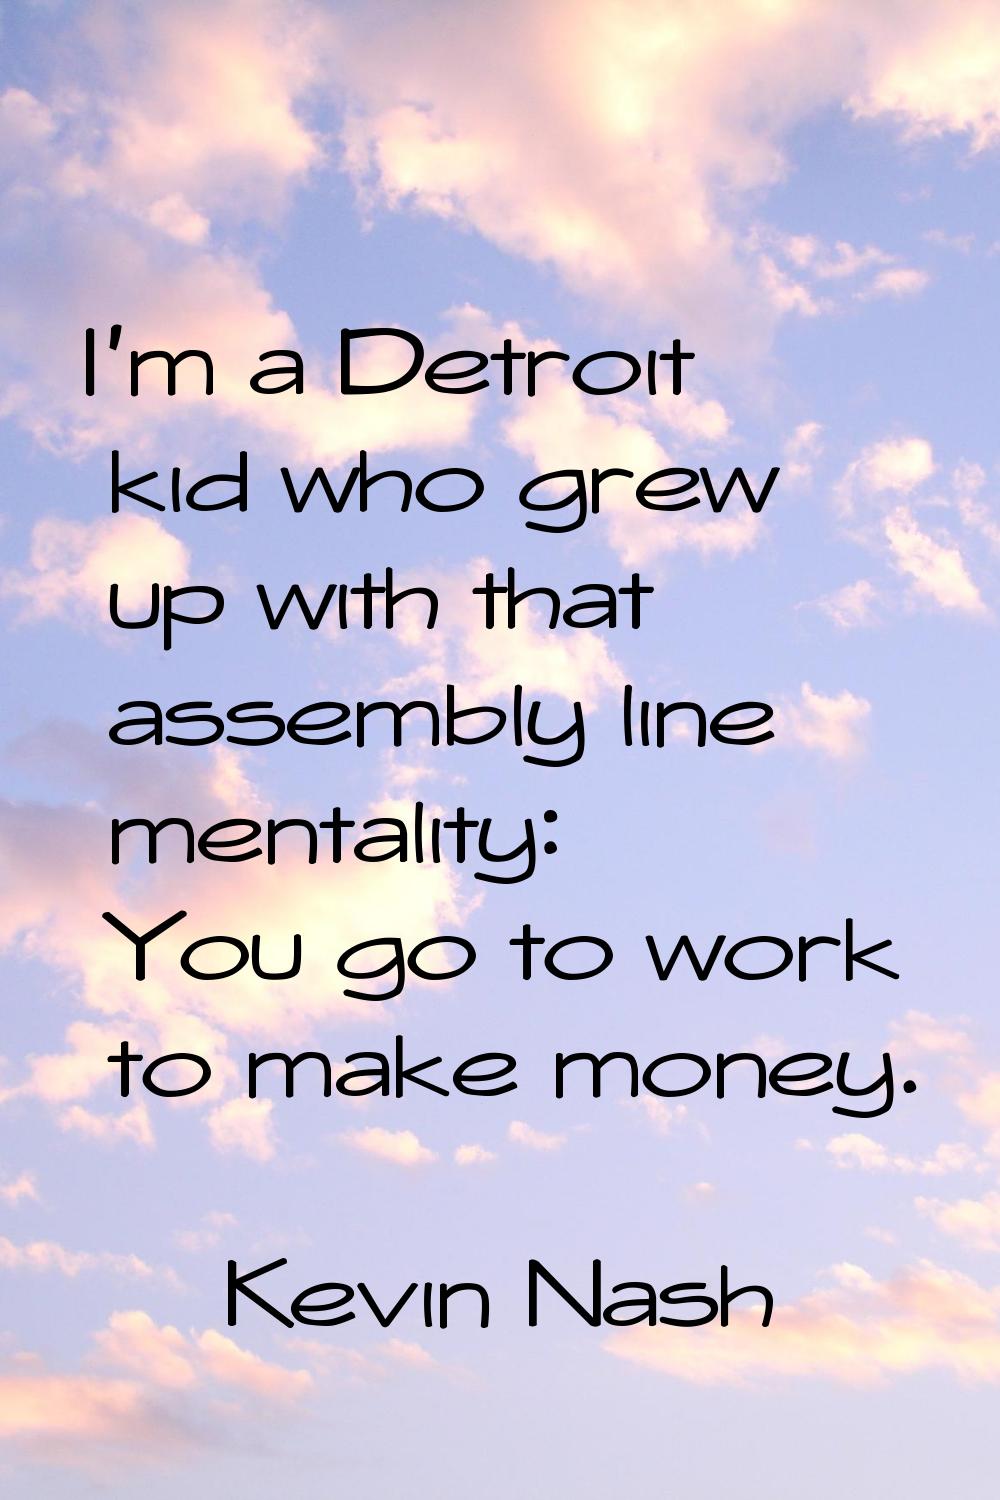 I'm a Detroit kid who grew up with that assembly line mentality: You go to work to make money.